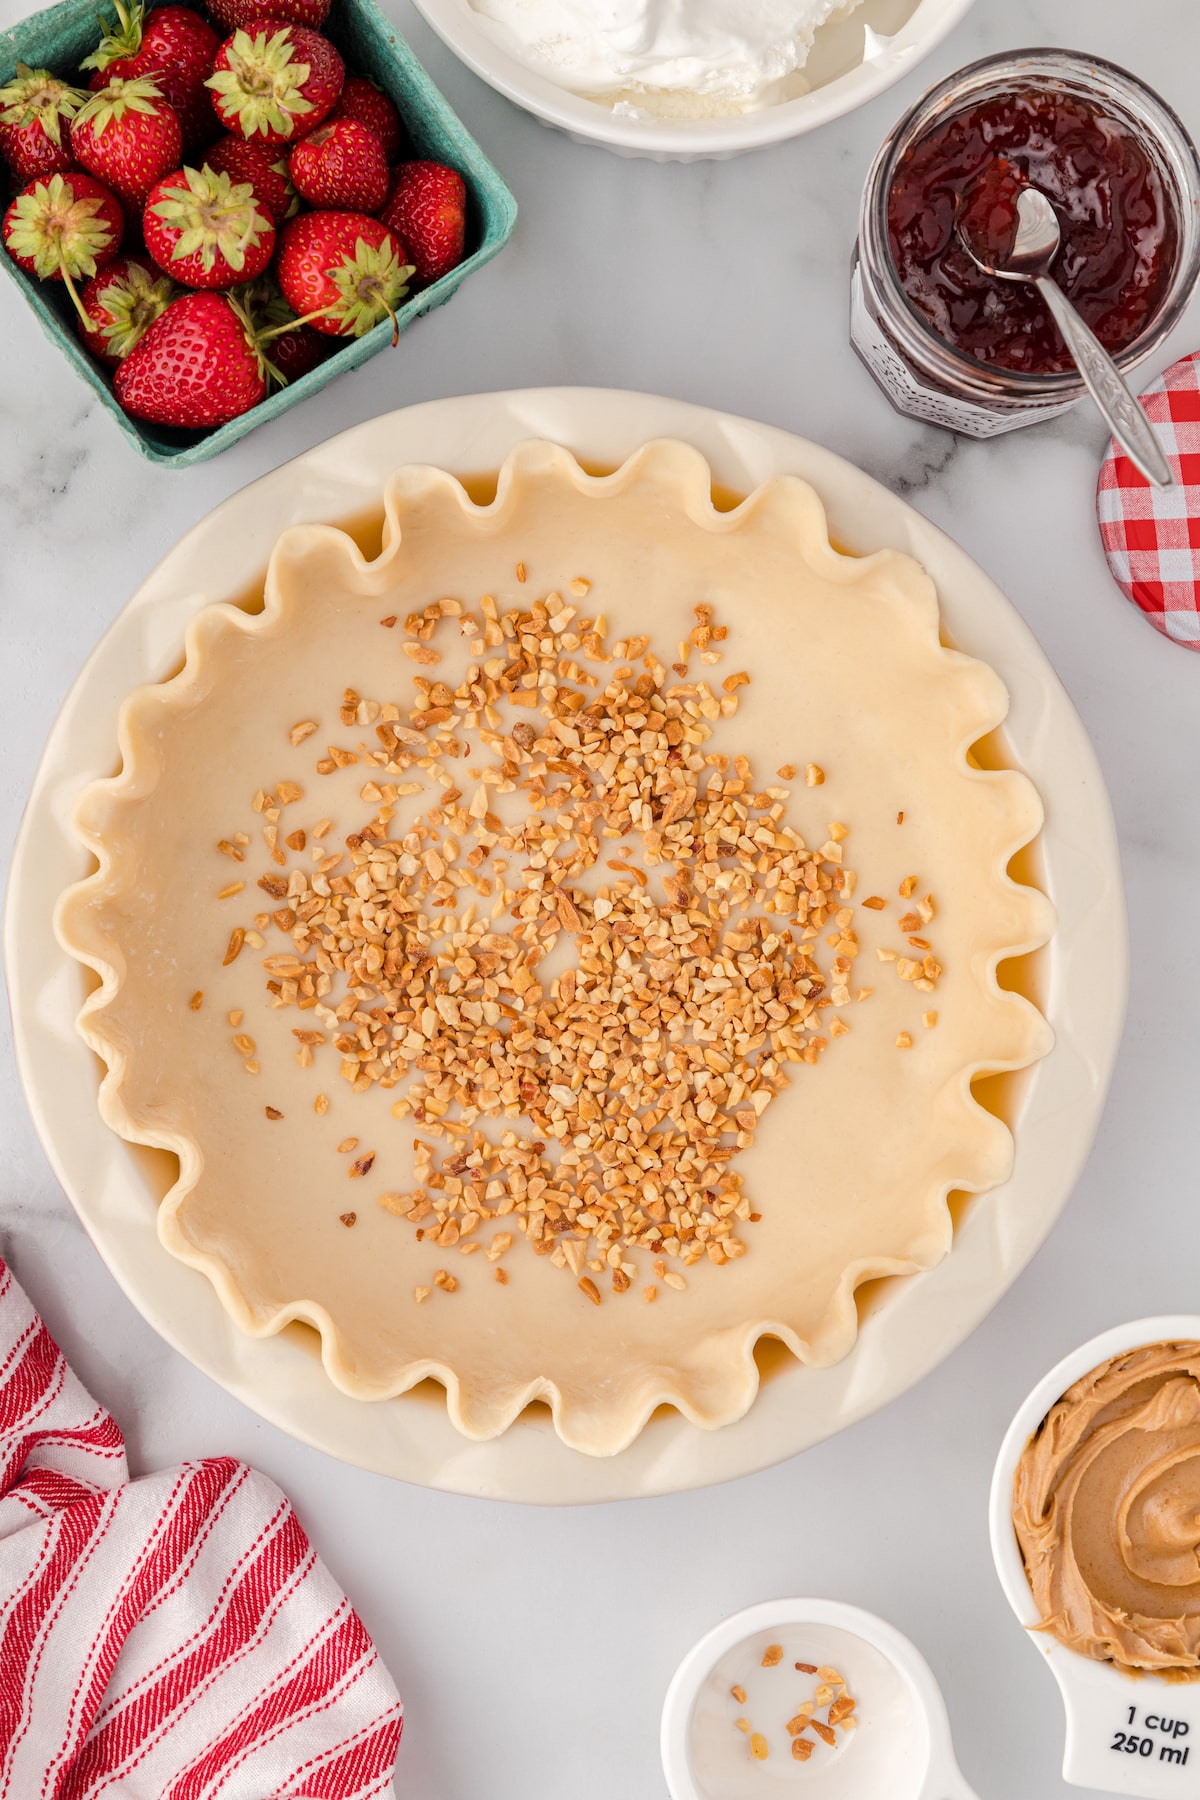 flute the edge and sprinkle the pie crust with chopped peanuts